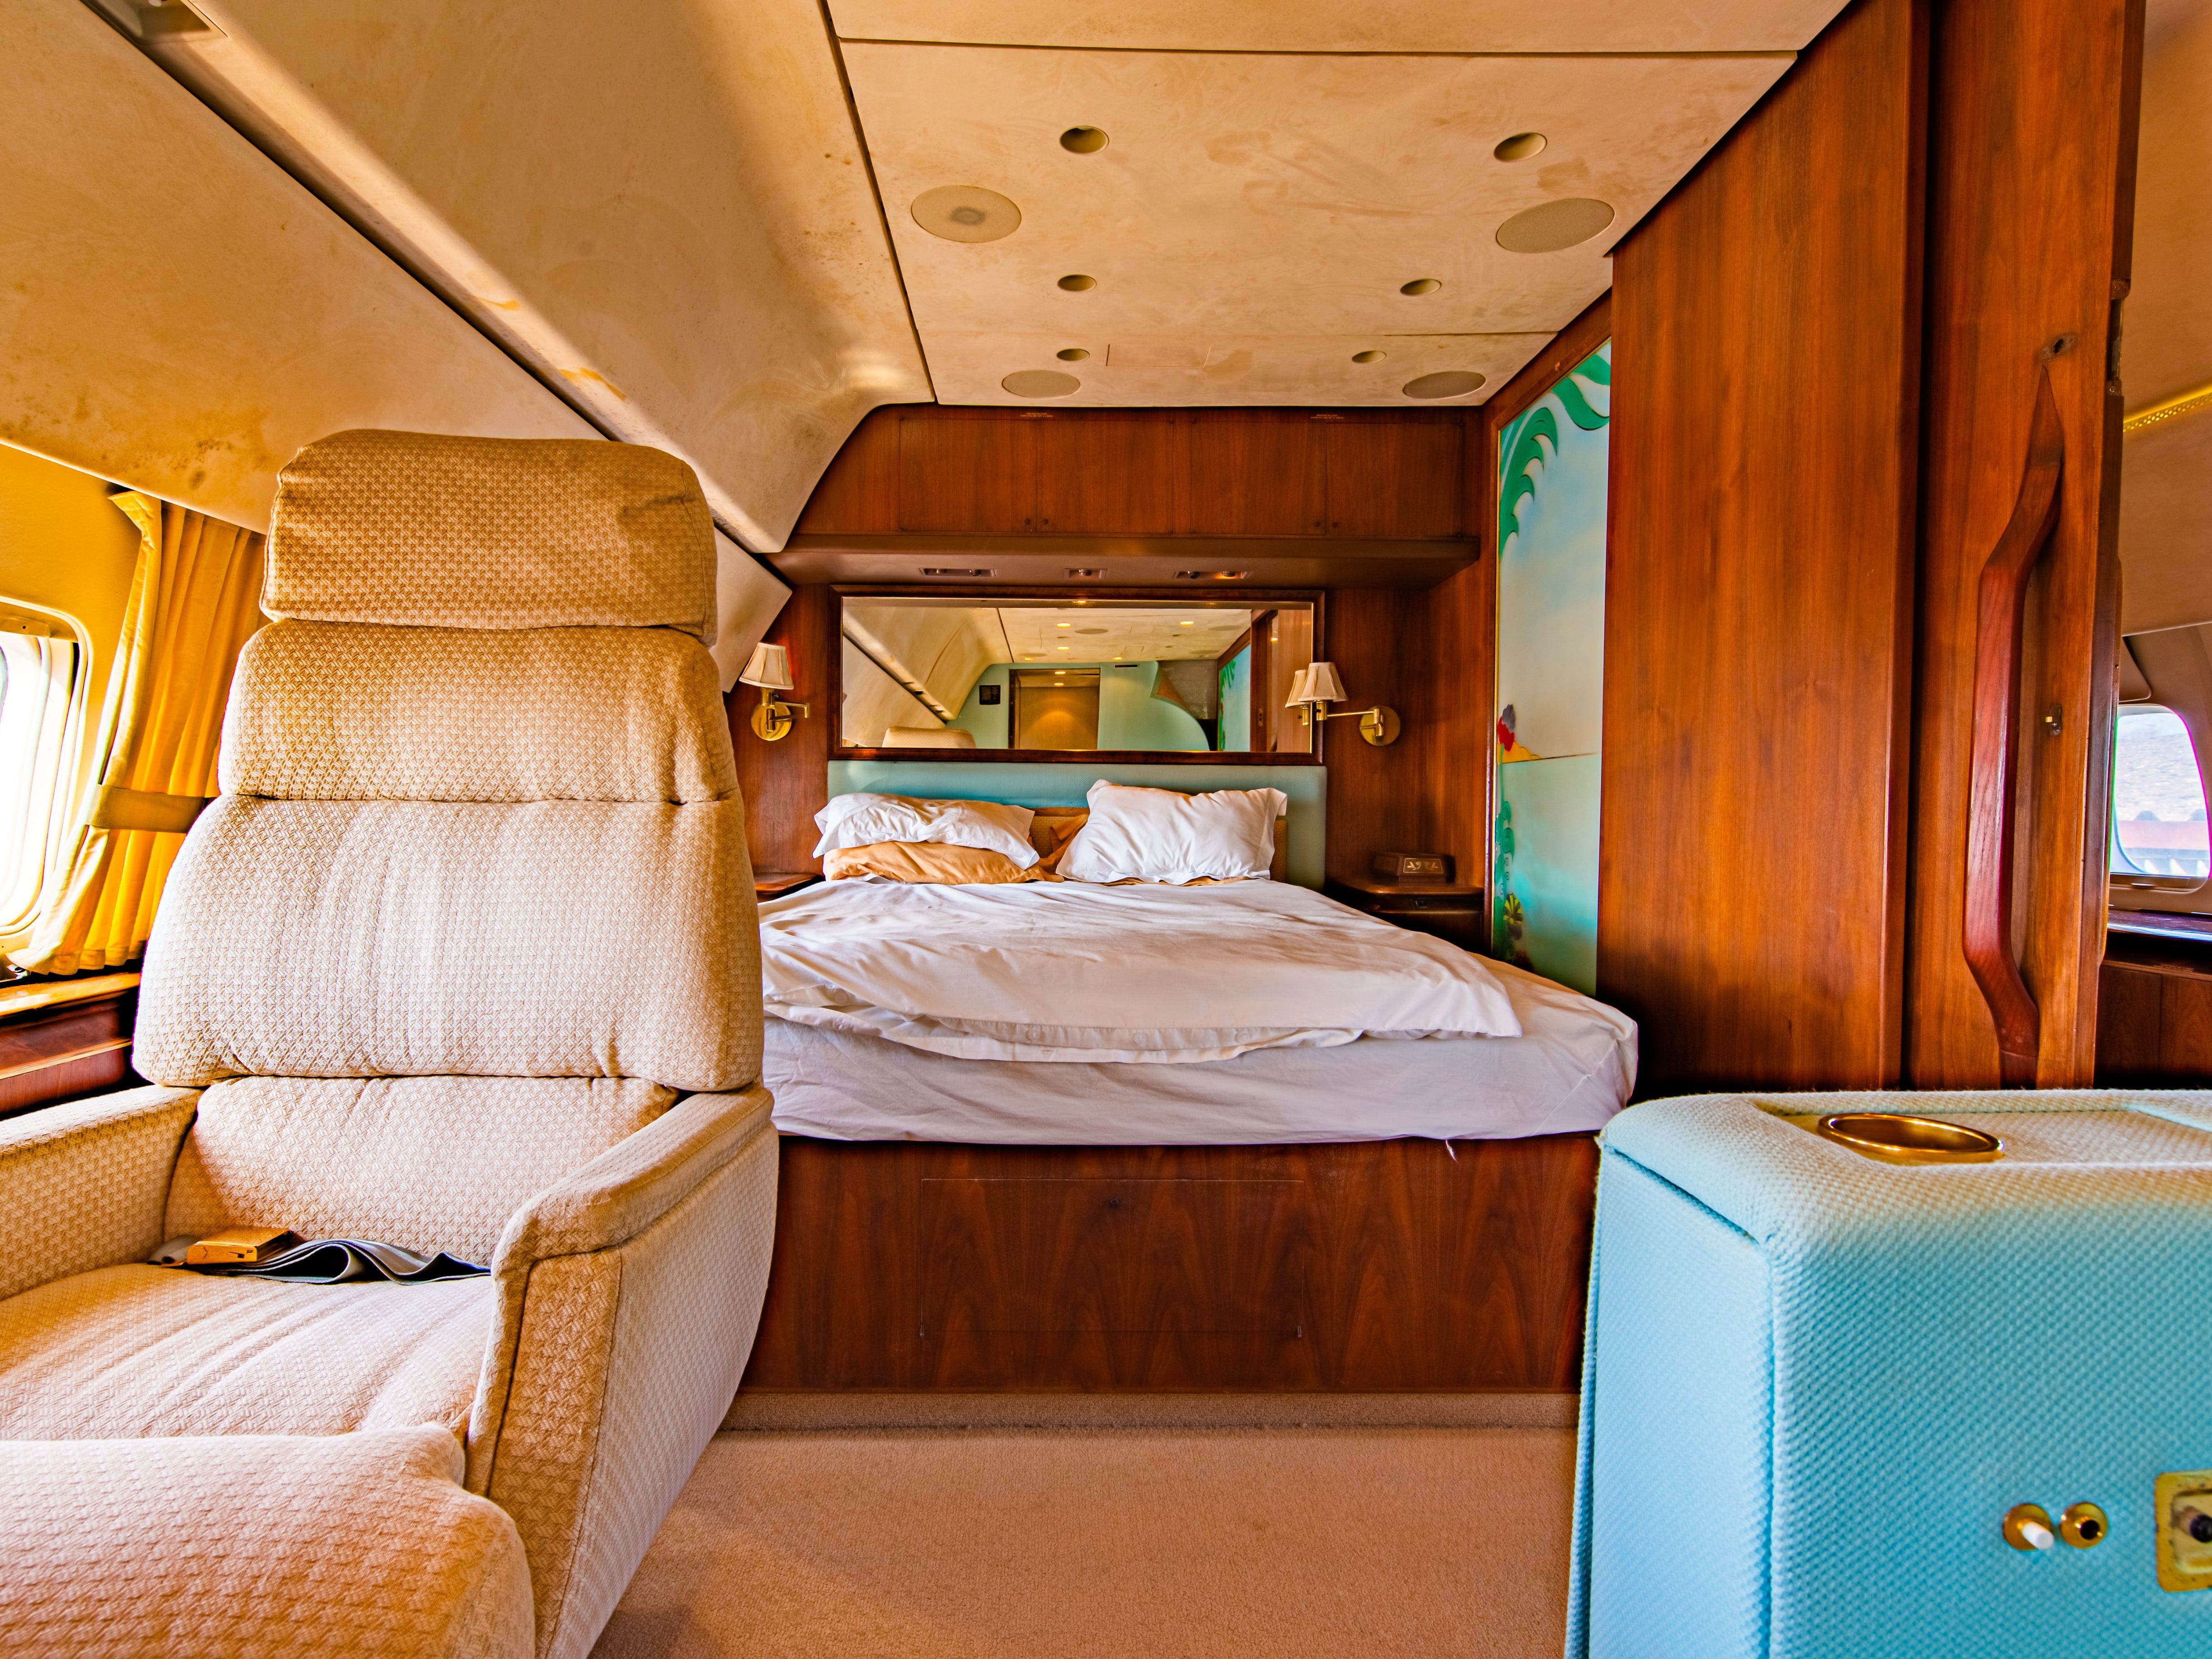 See inside a Boeing 727 salvaged from an aircraft 'graveyard' and converted into a lavish Airbnb that starts at $438 a night